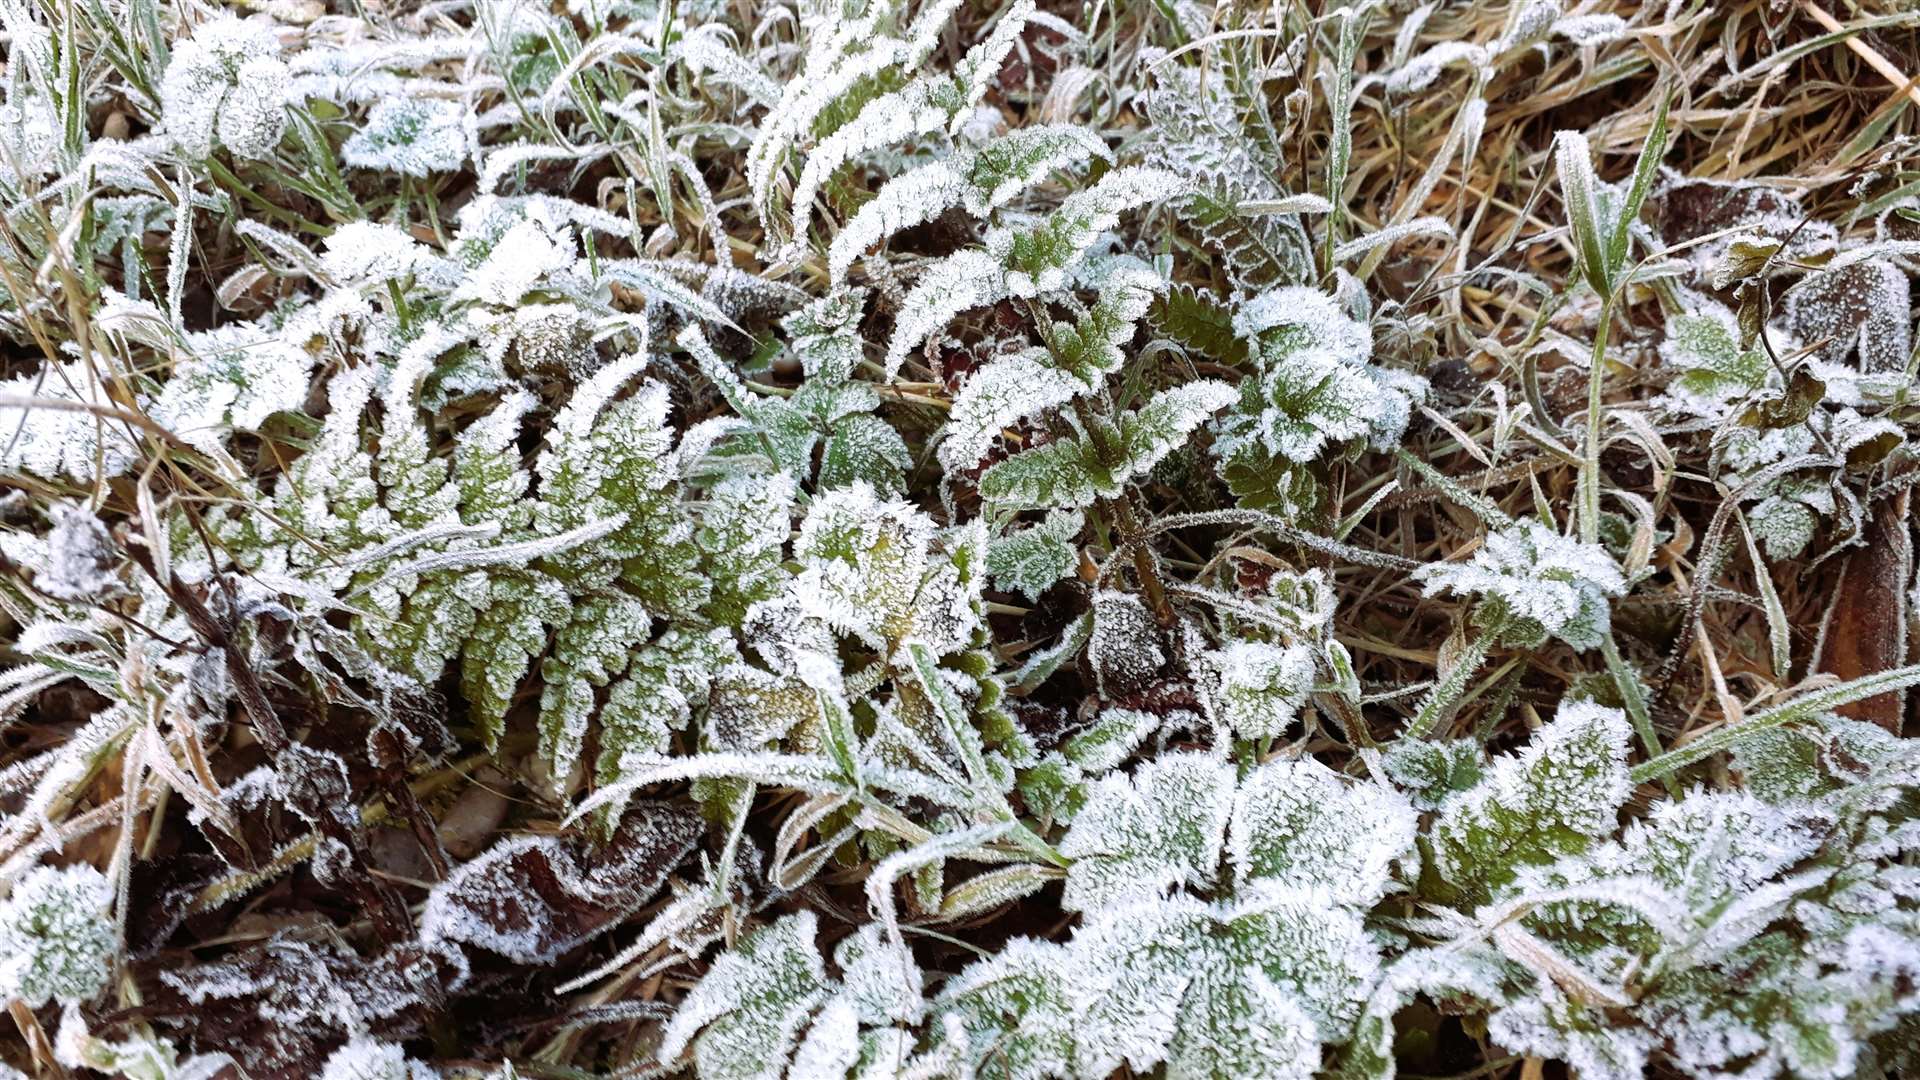 Picture of hoar frost on vegetation sent in by Wick's weather watcher Keith Banks.